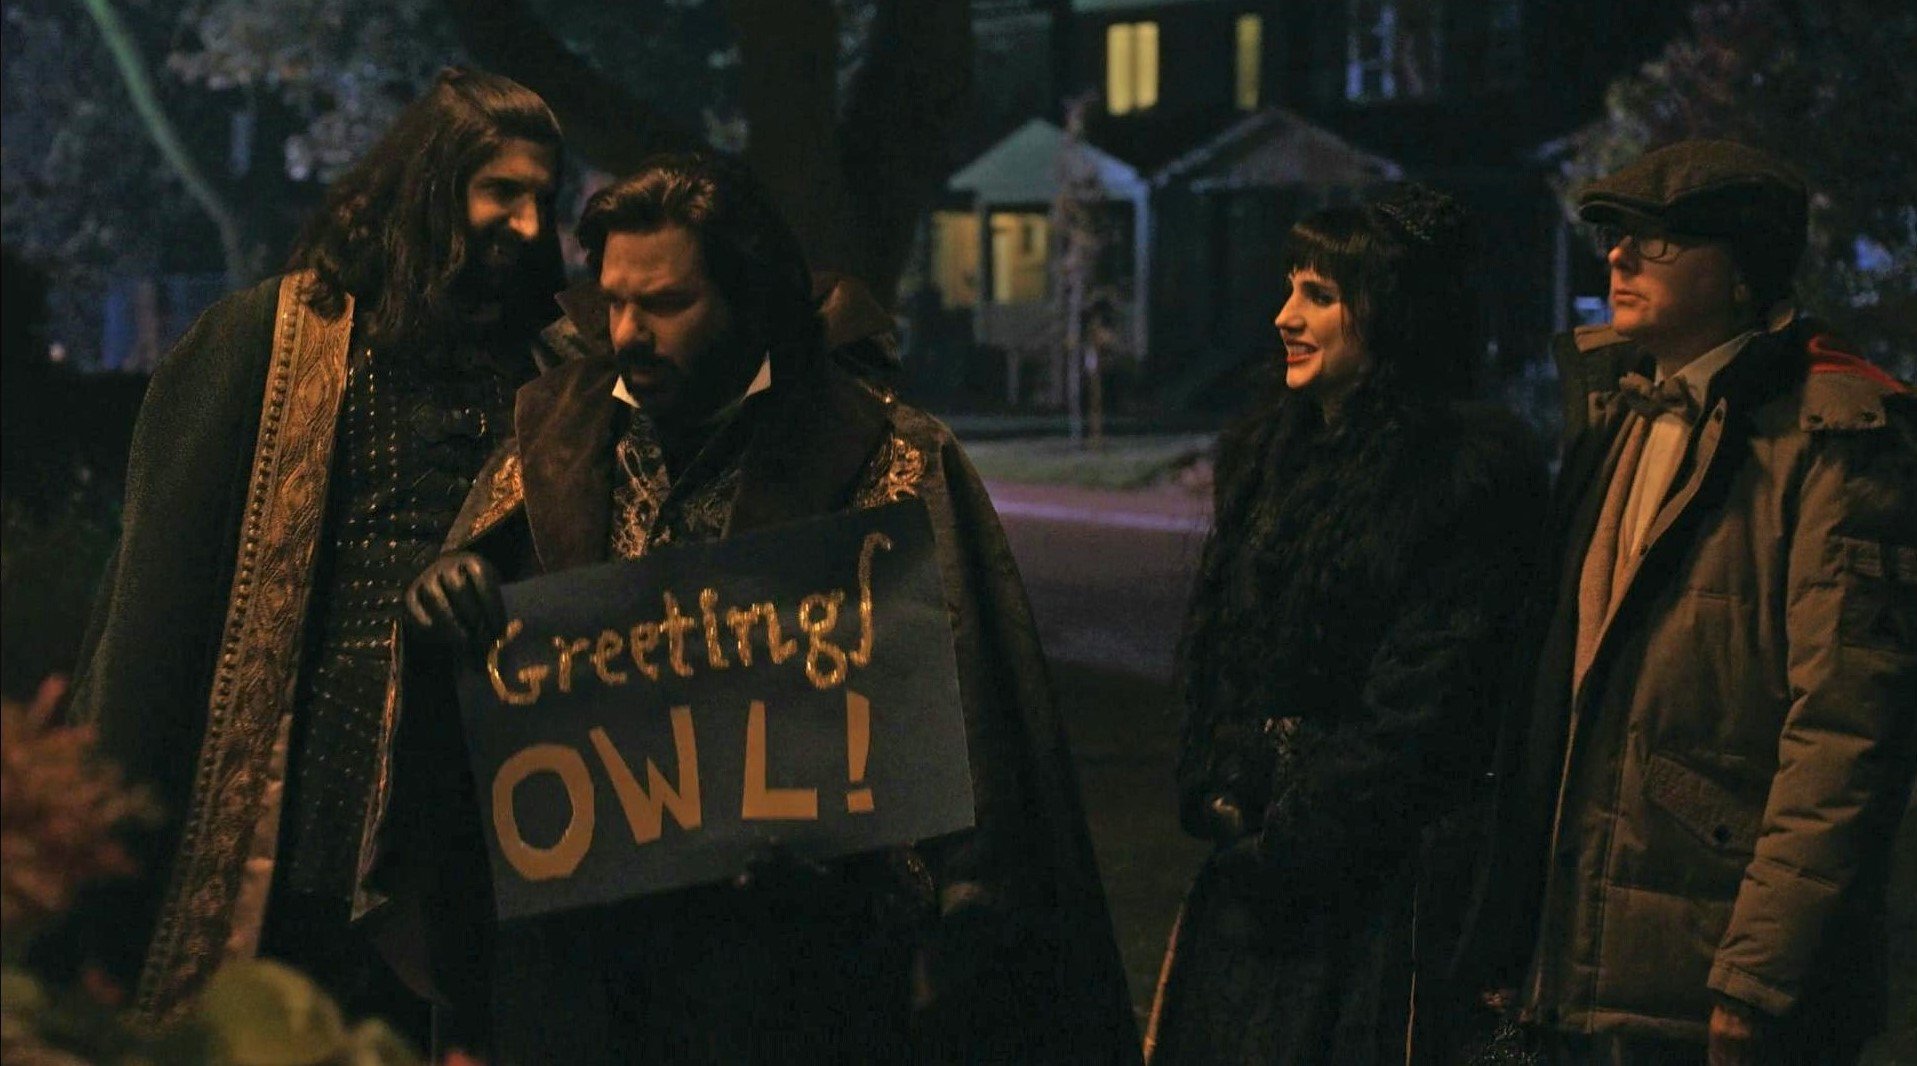 the vampires of what we do in the shadows hold a "greetings owl" sign